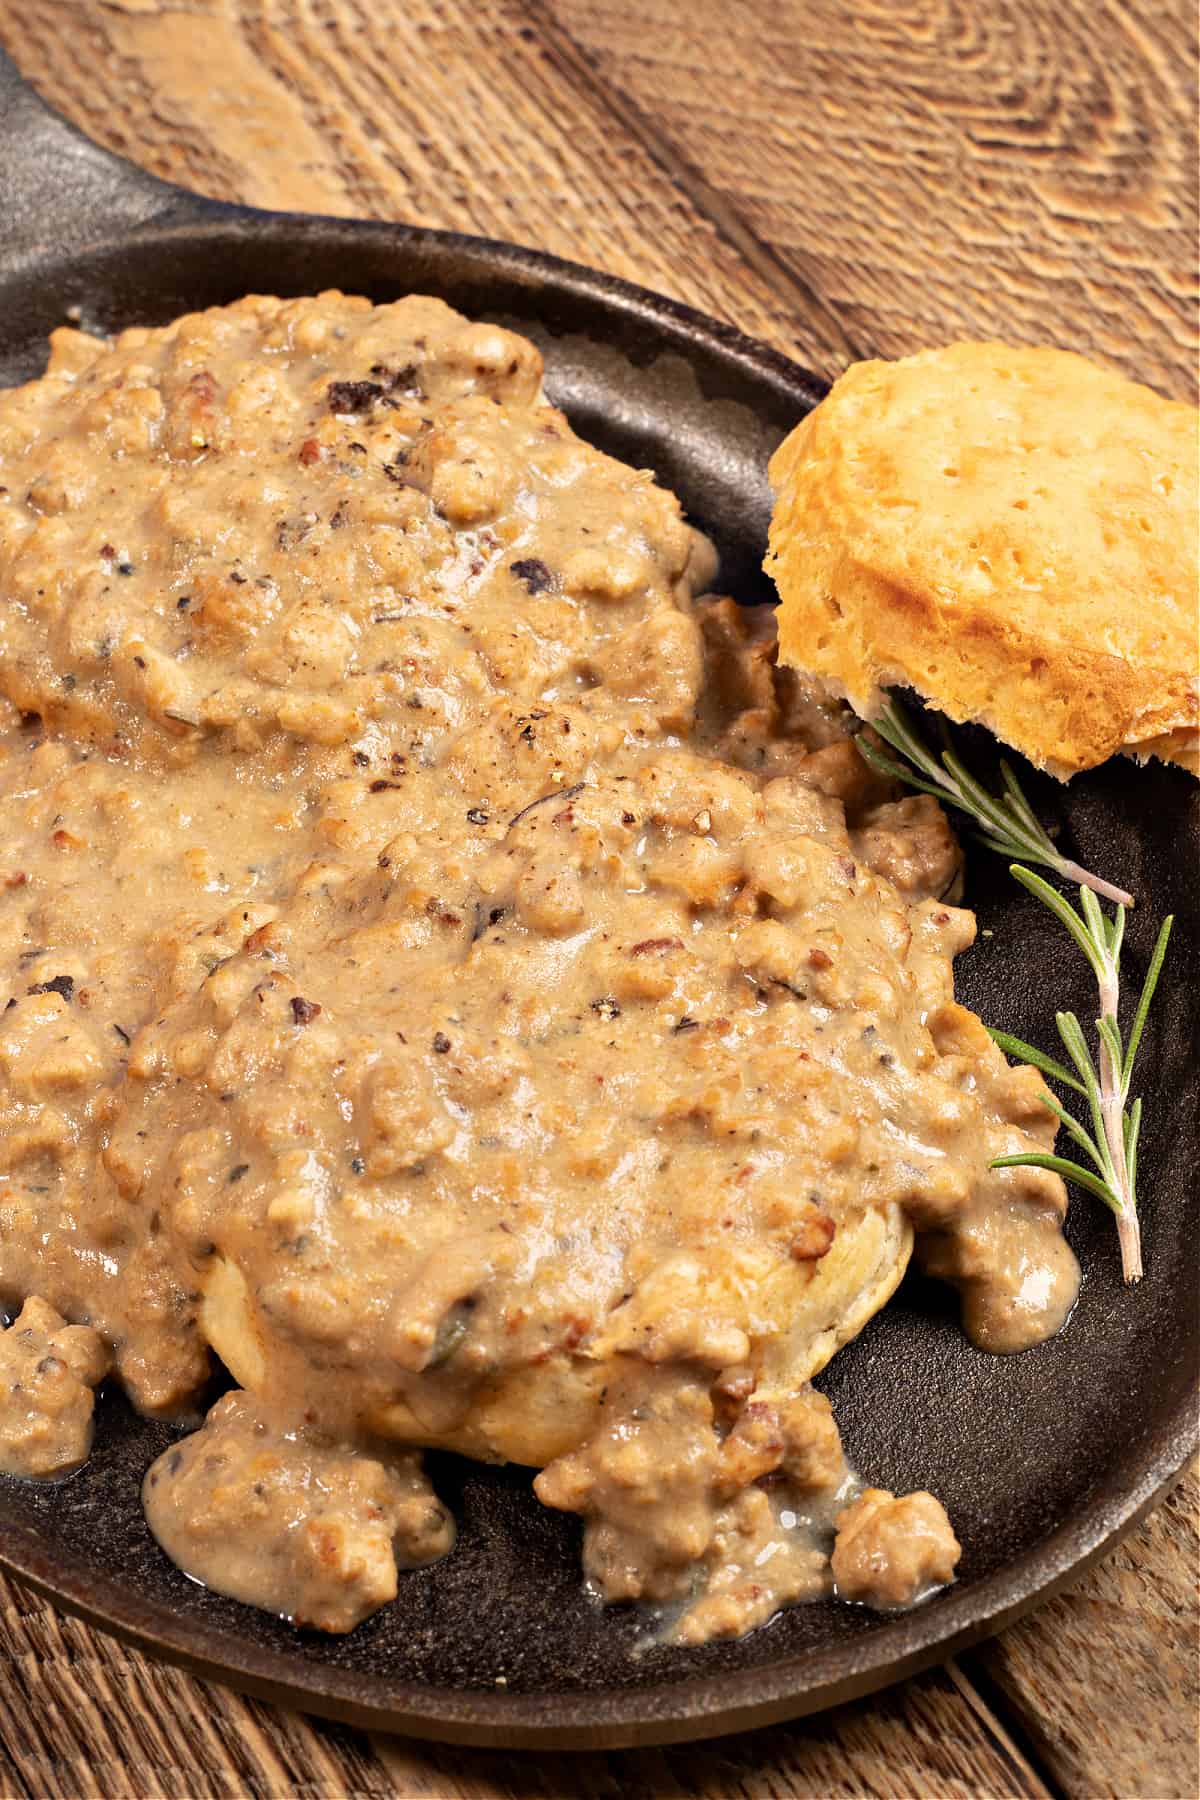 iron skillet with vegan biscuits and gravy